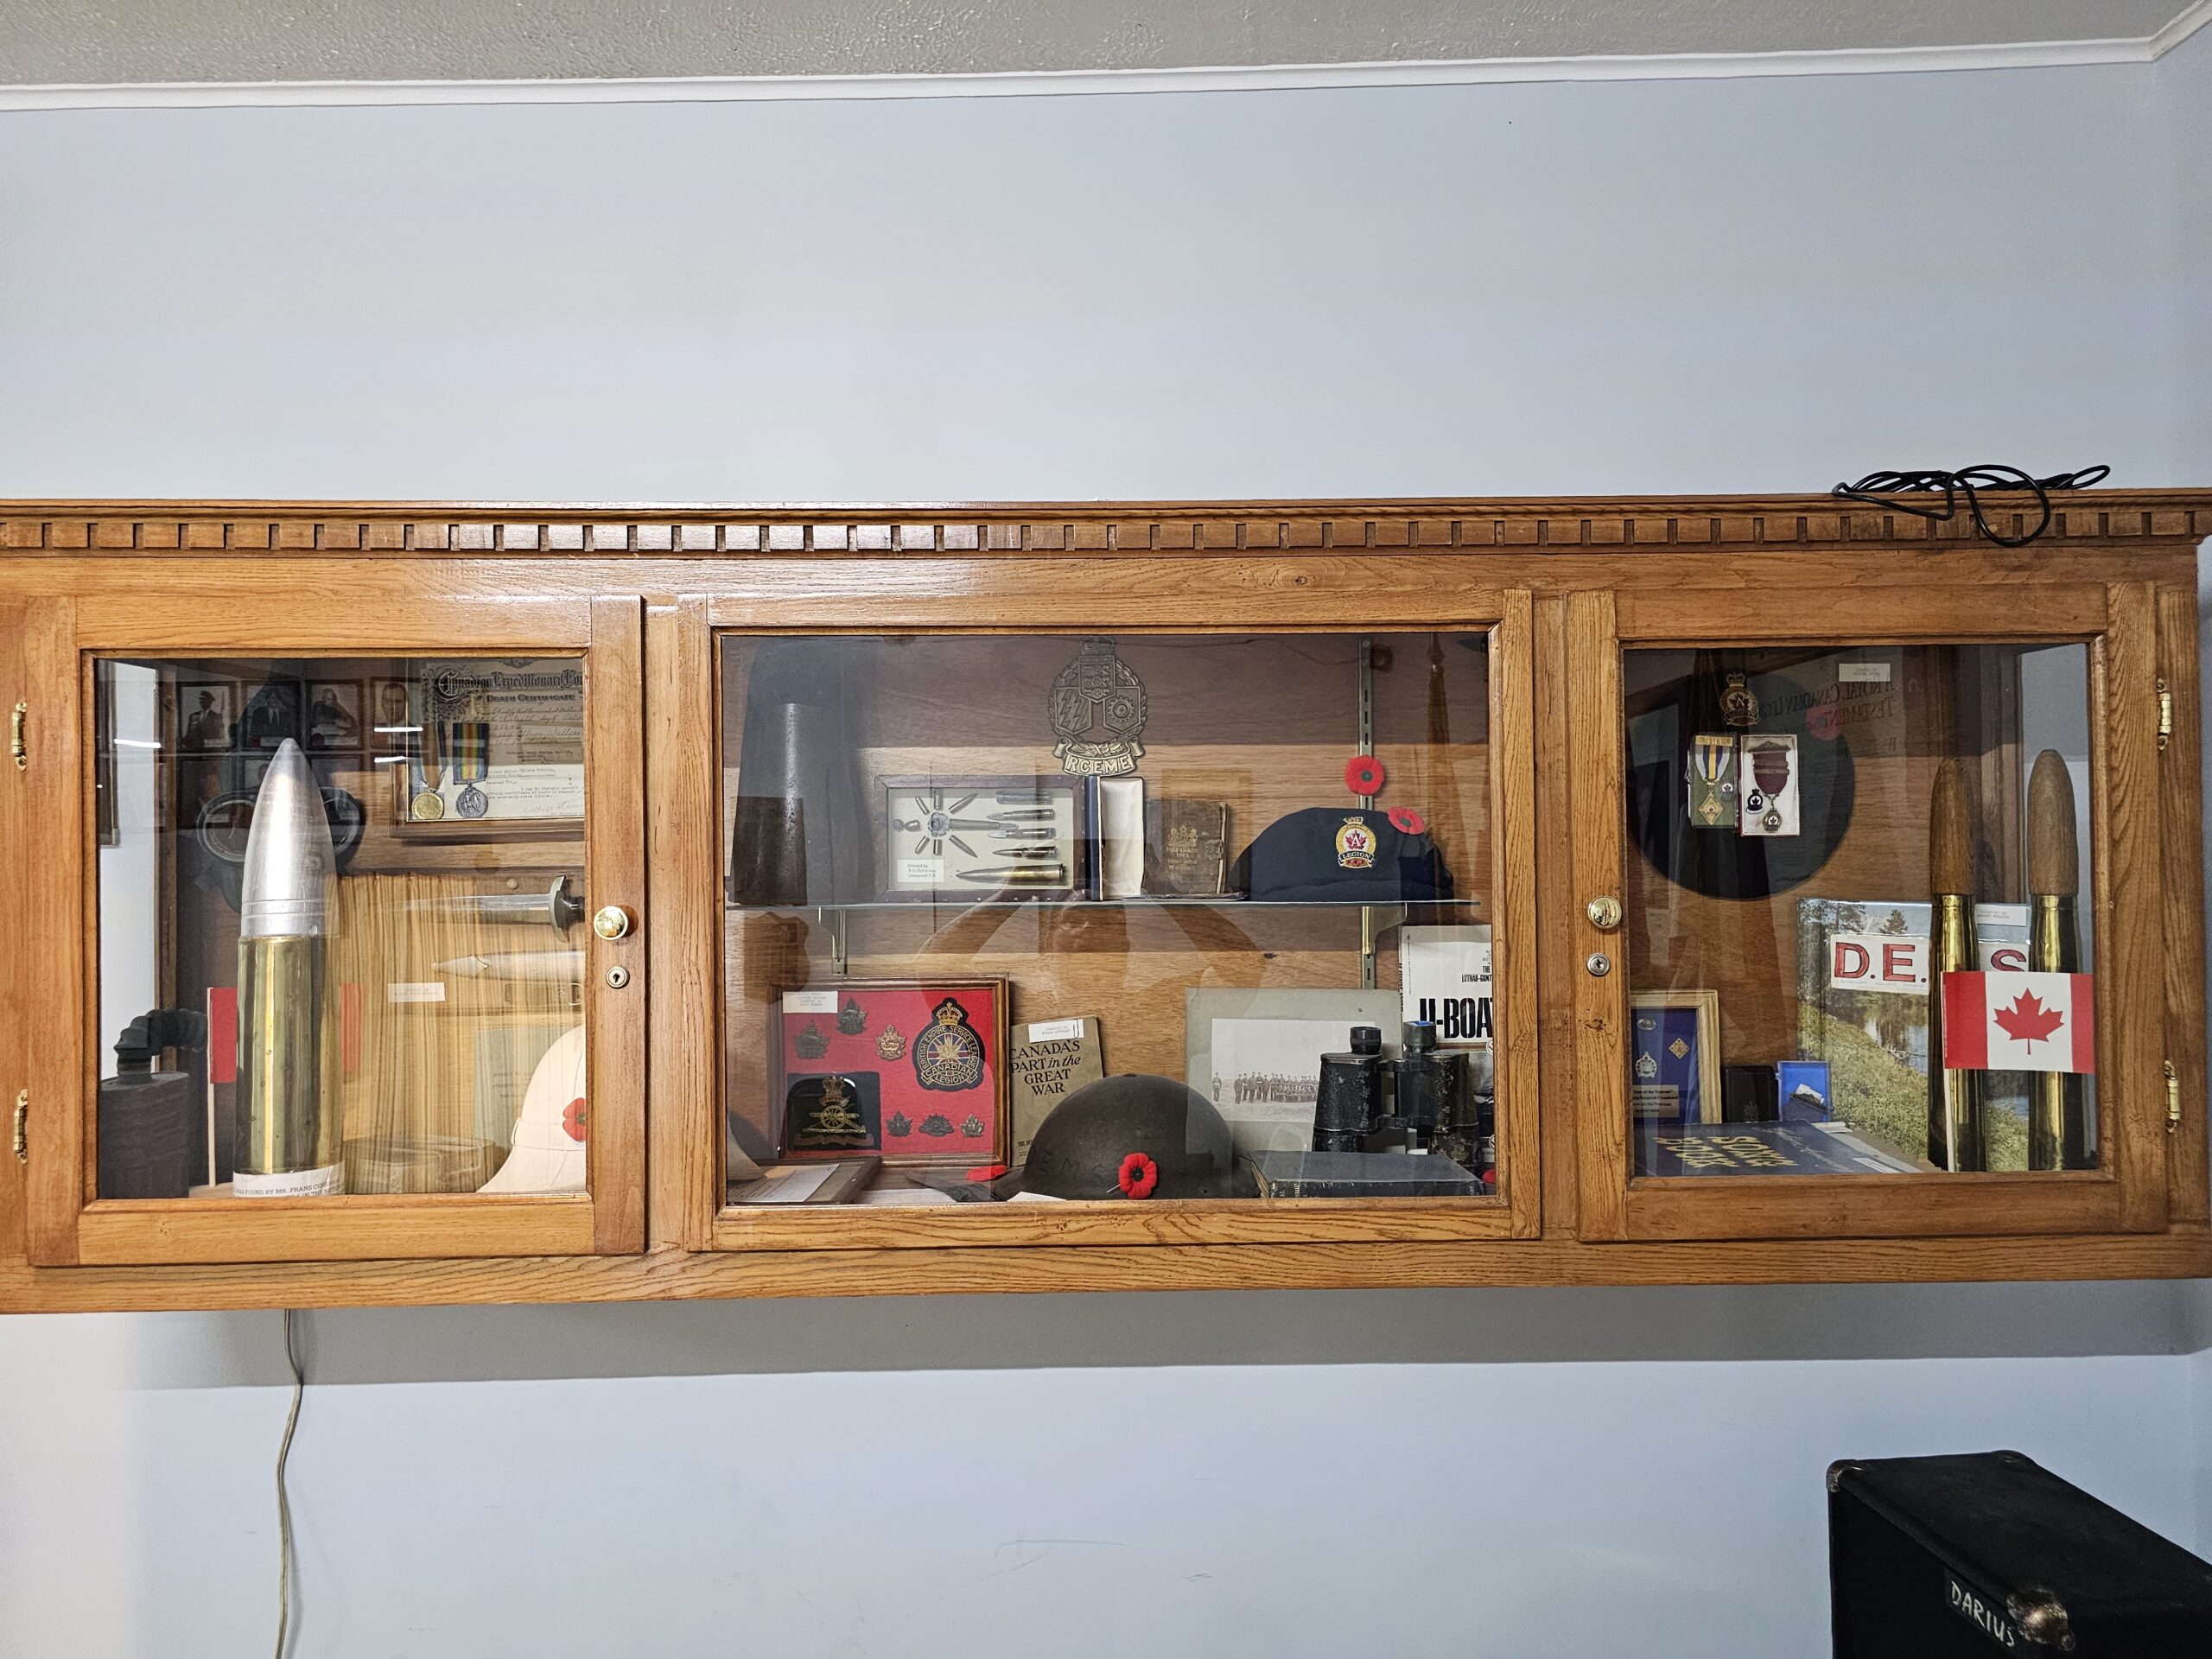 A case with memorabilia from all of the Canadian Armed Forces, of varying ages from many different conficts.